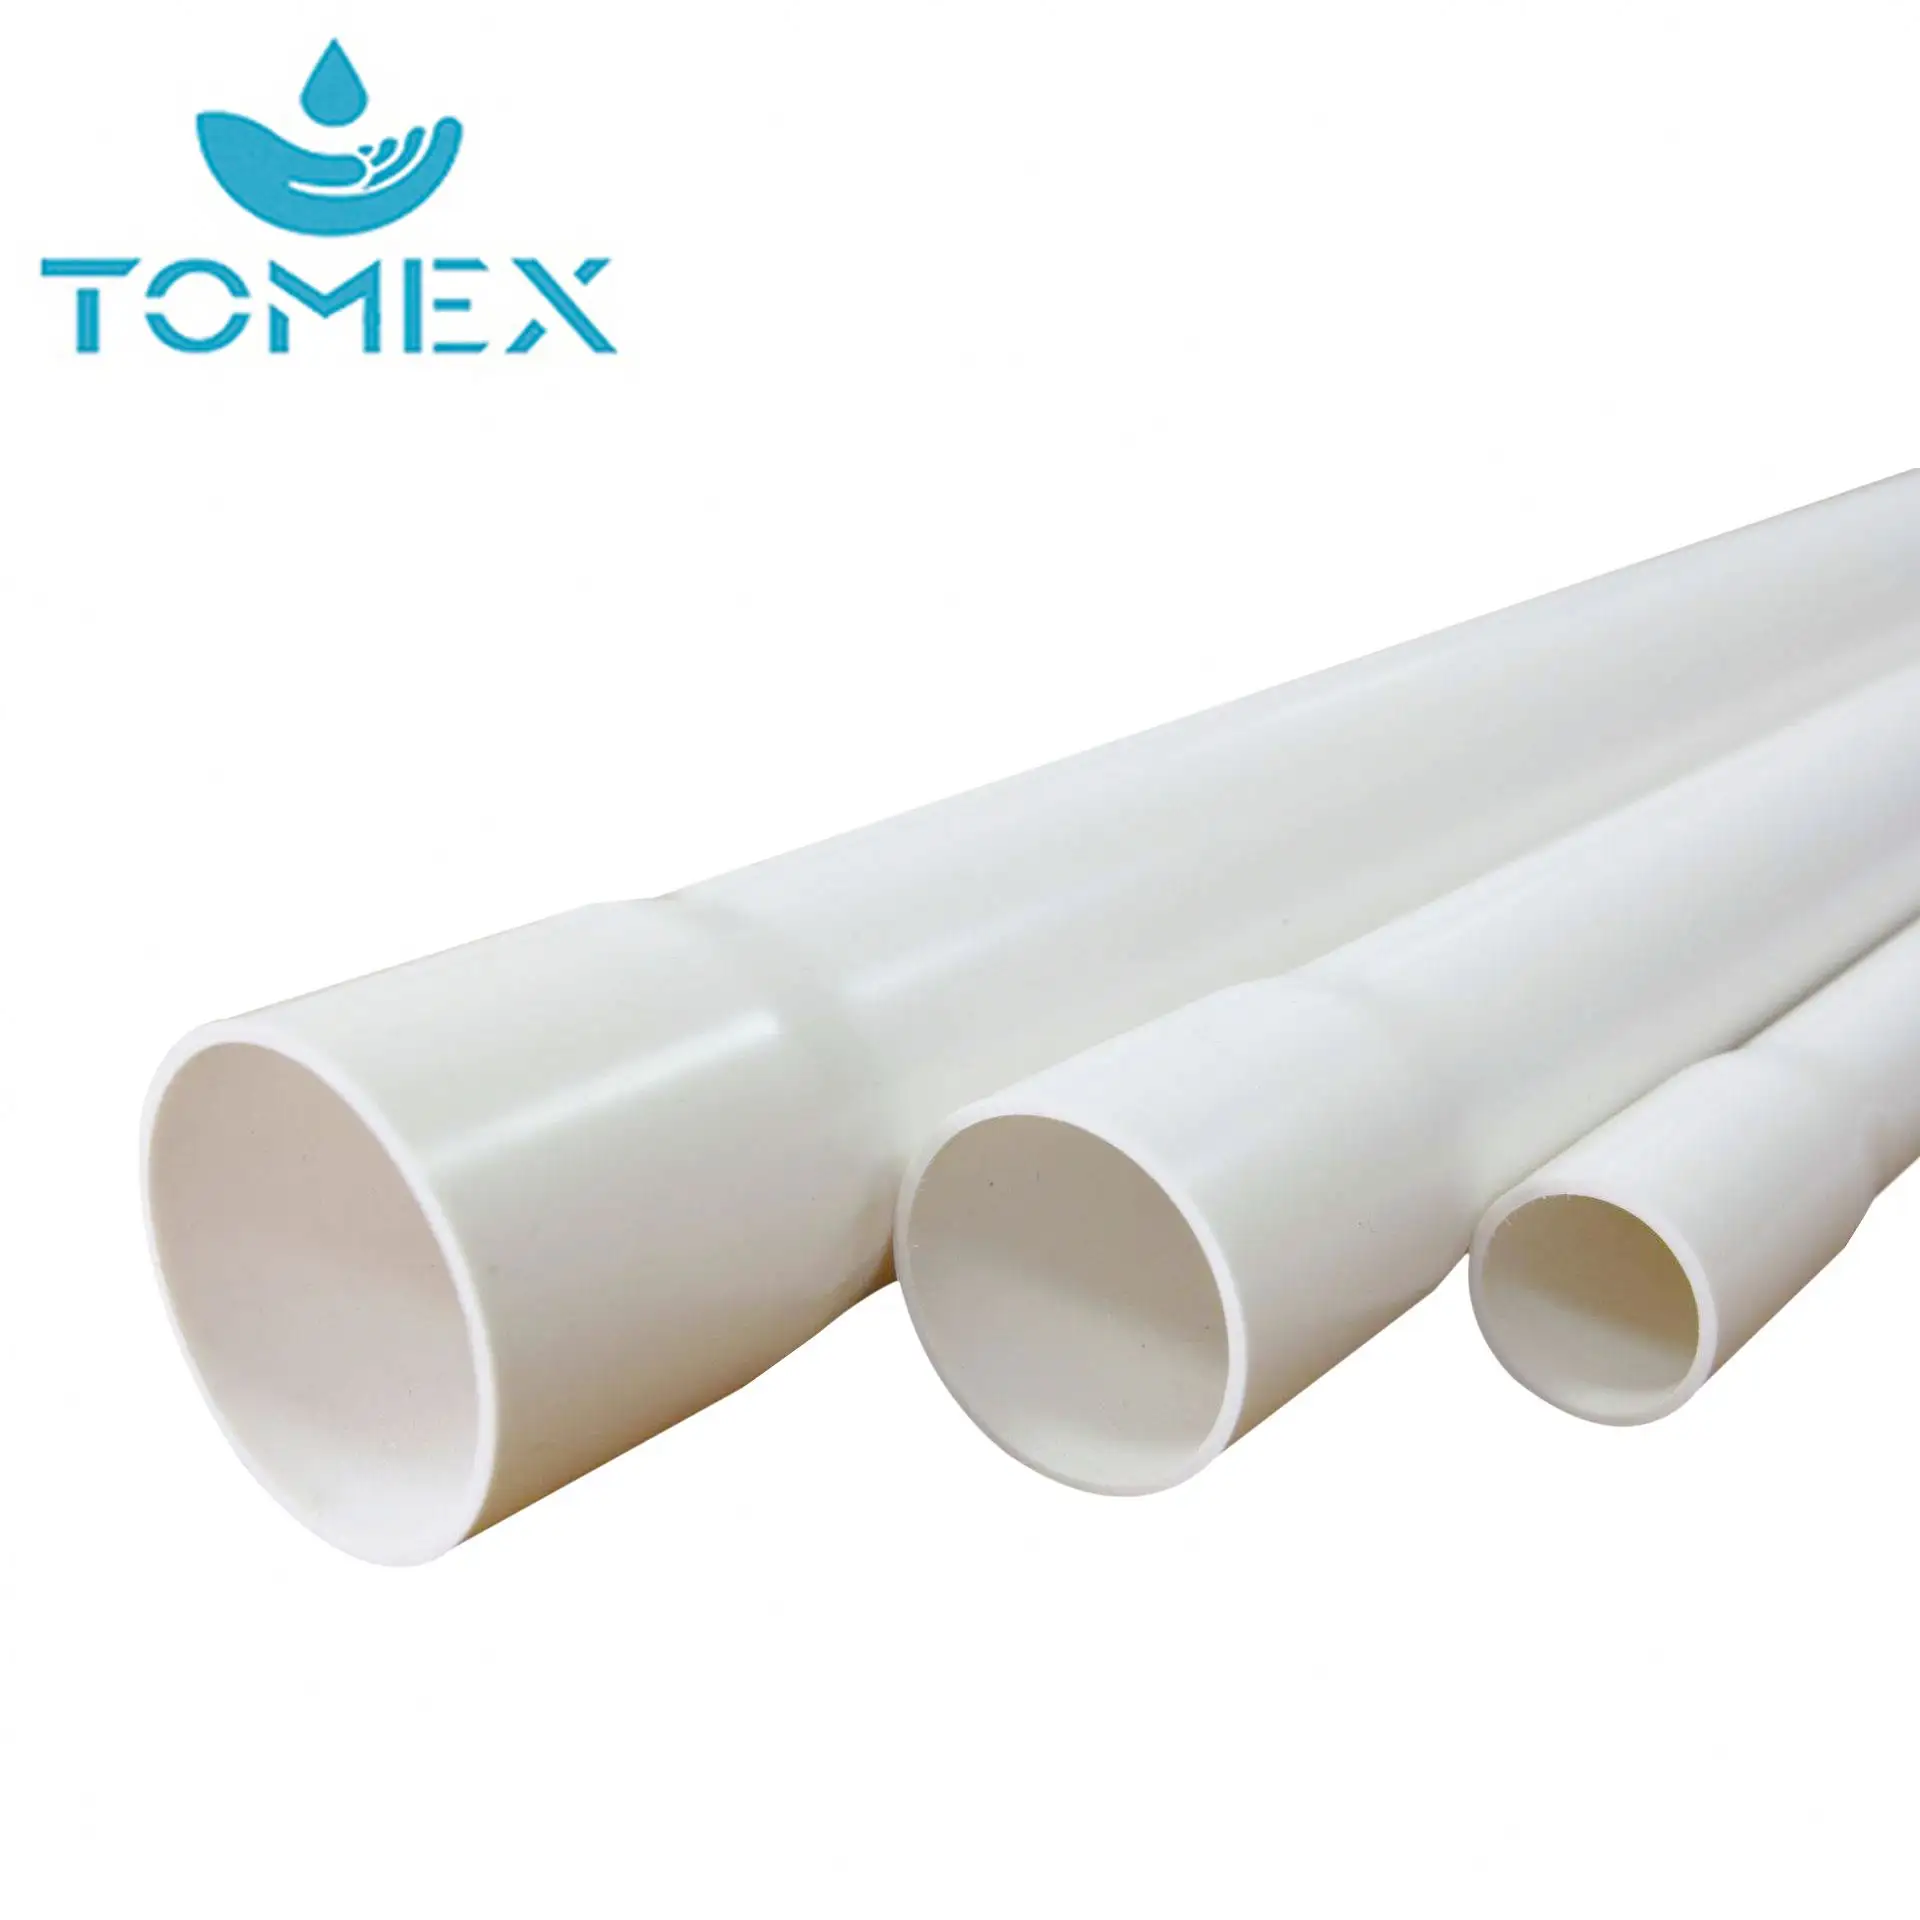 ASTM pvc pipe U-pvc plastic pipe sch40 or sch 80 1/2-6 inch pipe with belled end